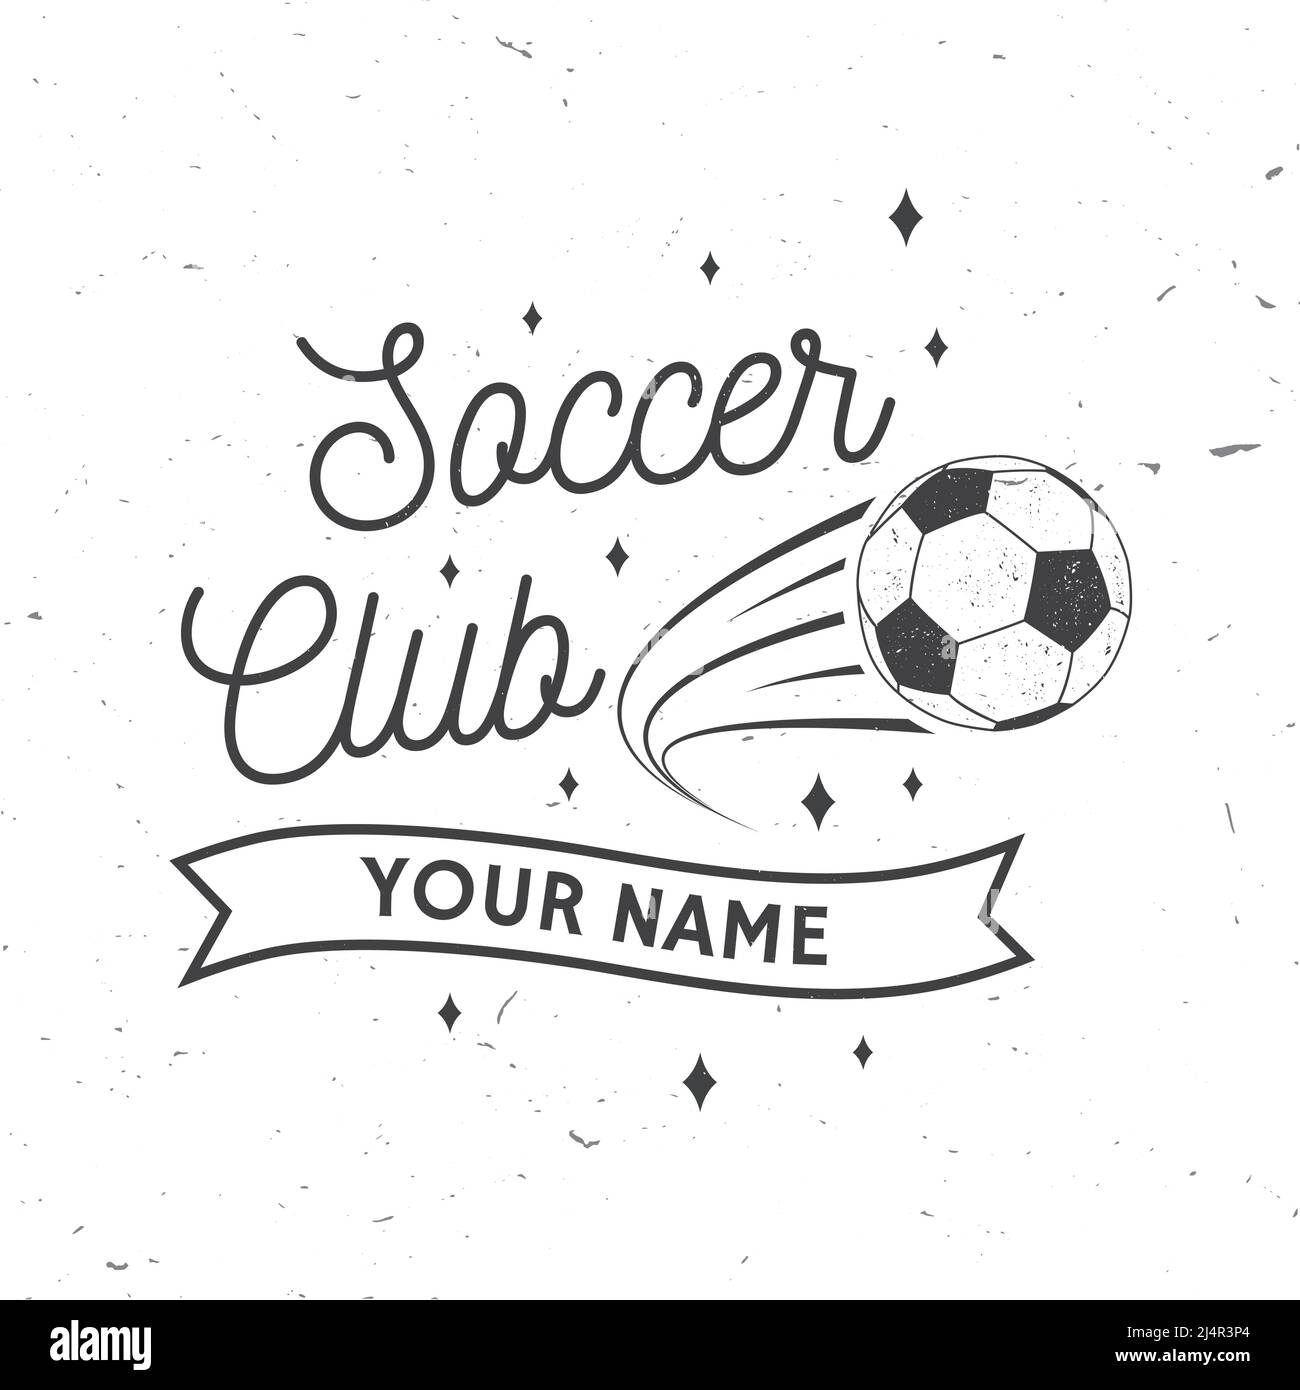 Soccer, football club badge design. Vector illustration. For college league football club sign, logo. Vintage monochrome label, sticker, patch with Stock Vector